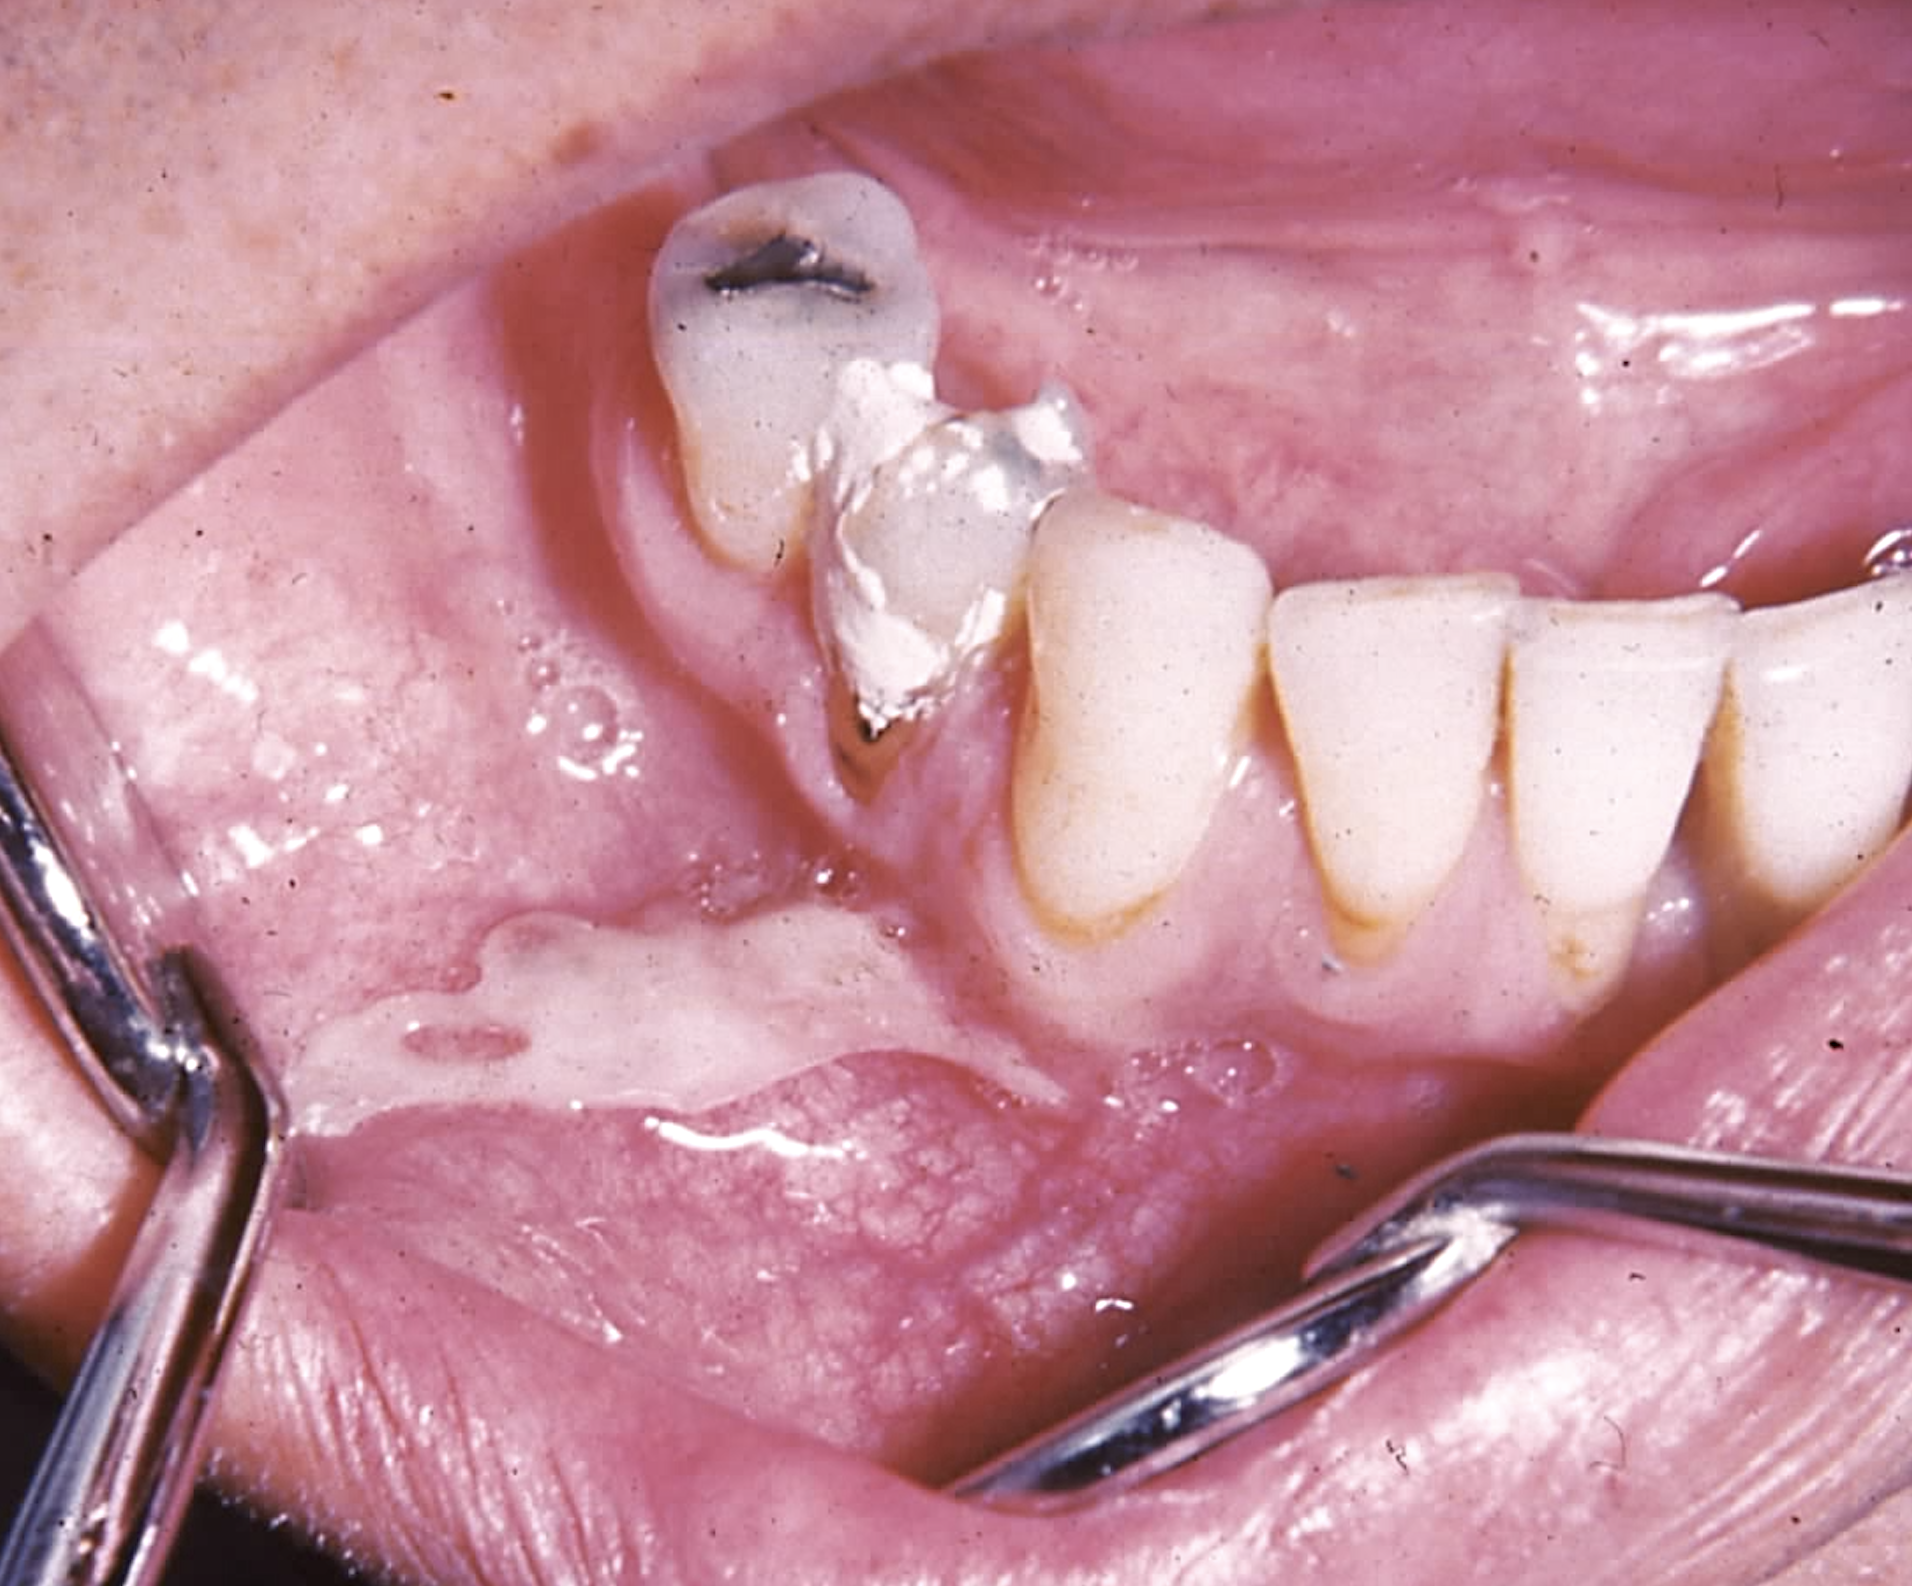 Aspirin induced chemical burn noted on the buccal mucosa, with noted residual aspirin present on teeth